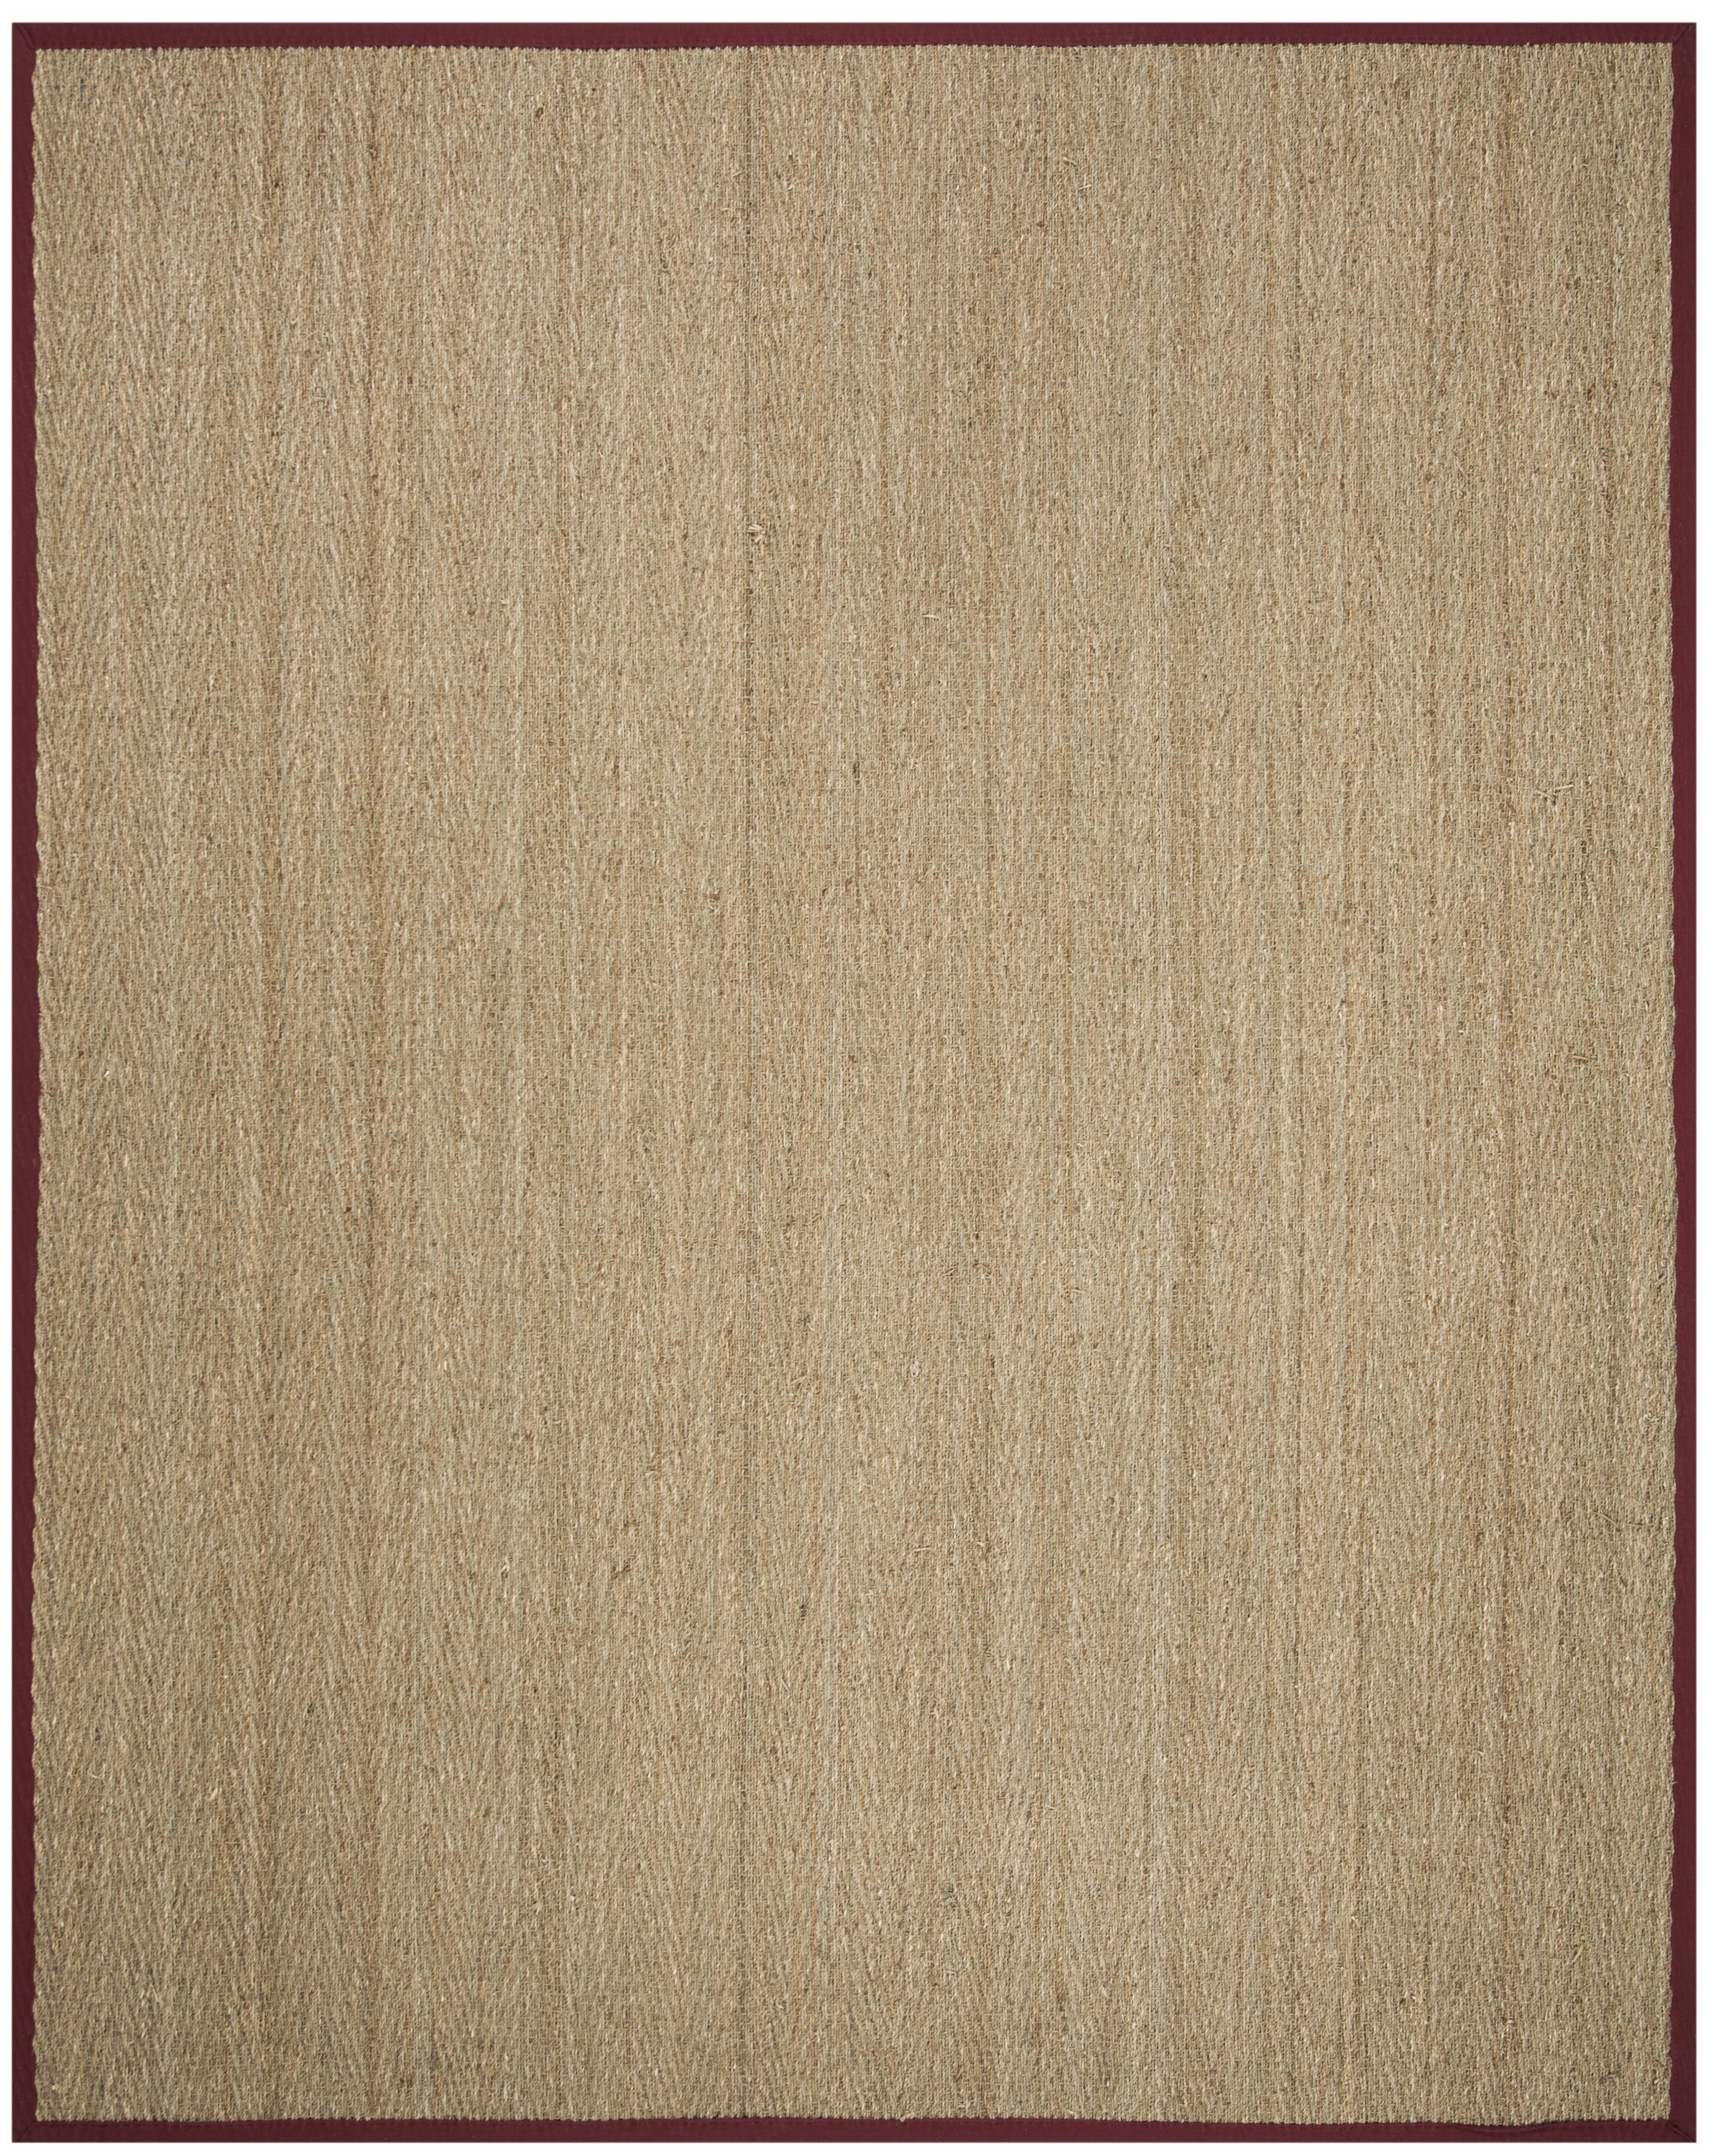 SAFAVIEH Natural Fiber Maisy Border Seagrass Area Rug, Natural/Red, 8' x 10' - image 1 of 8